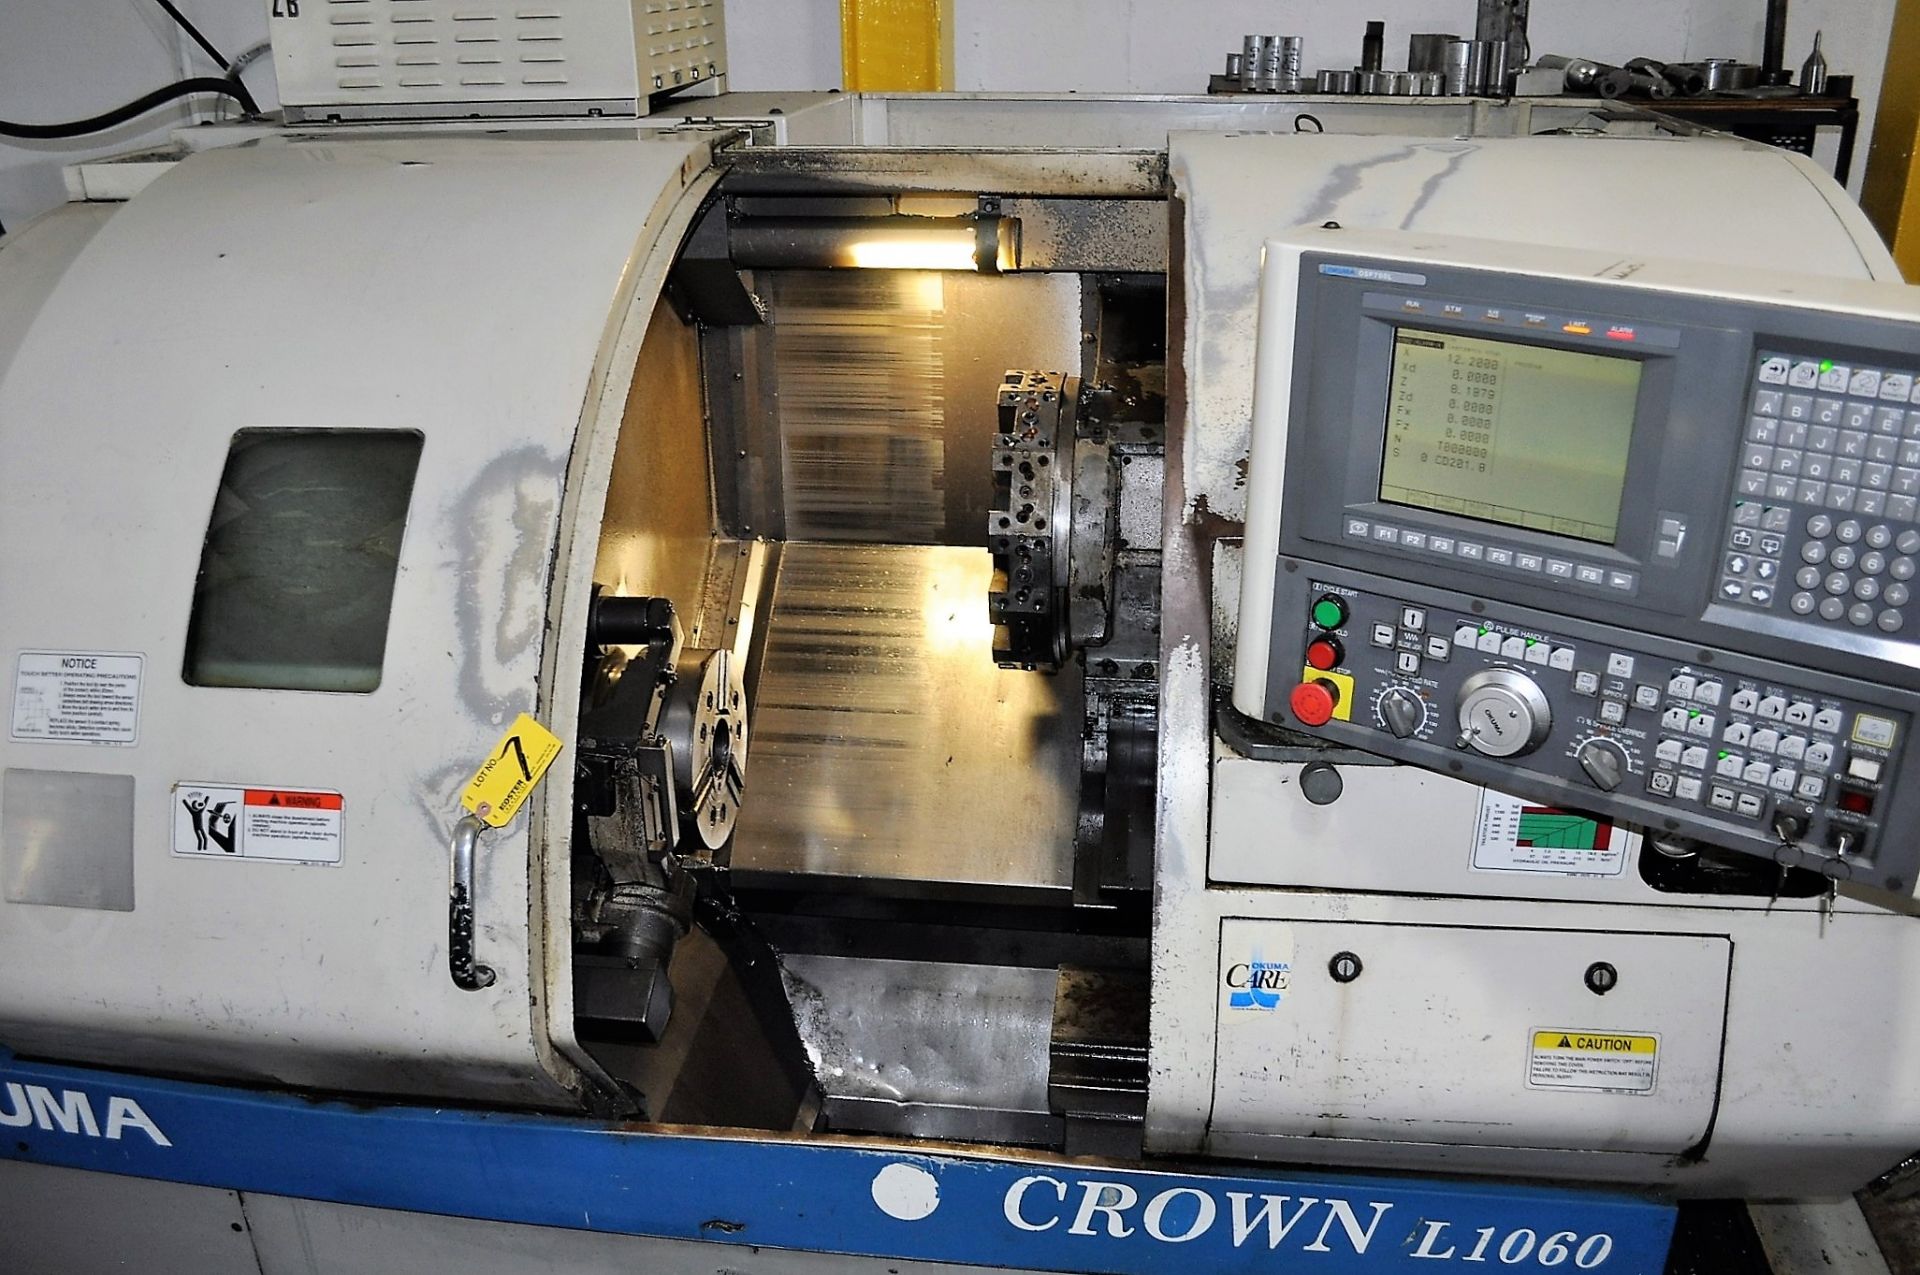 OKUMA MDL. 762S-BB CROWN BIG BORE, WITH 21.65'' MAX SWING OVER BED, 15.75'' MAX SWING OVER CROSS - Image 2 of 13